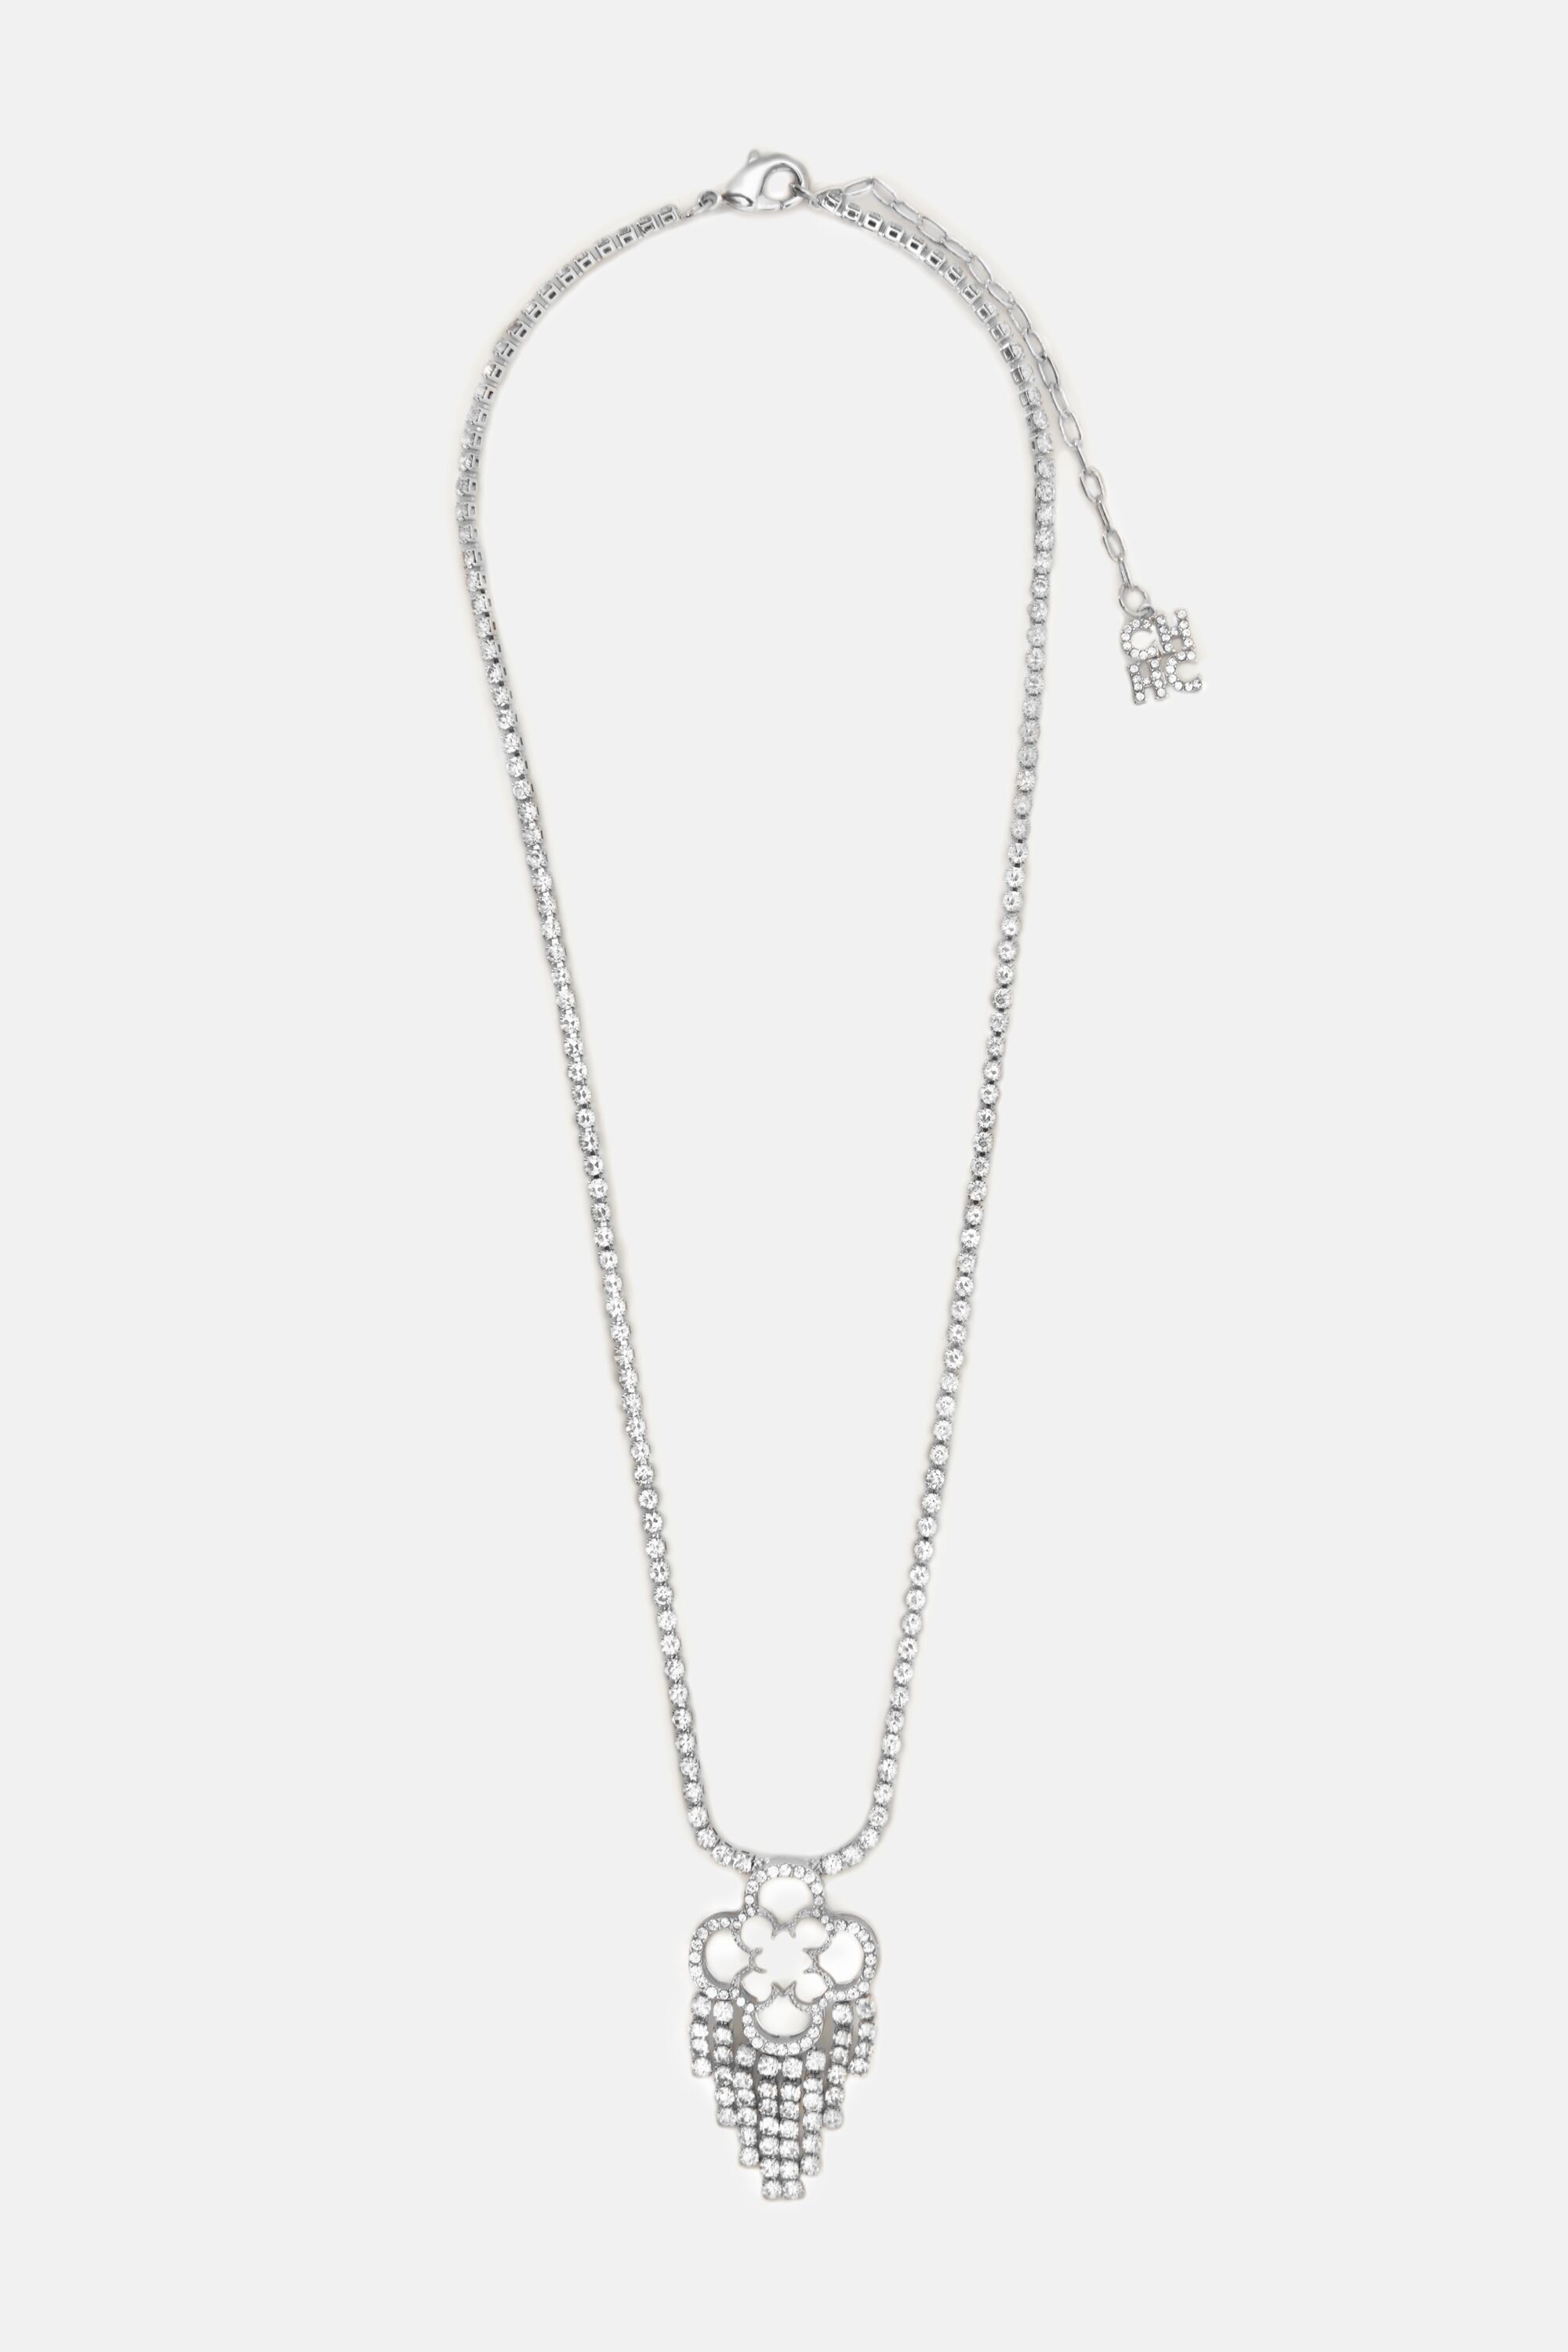 Rosetta Crystal Pearl necklace